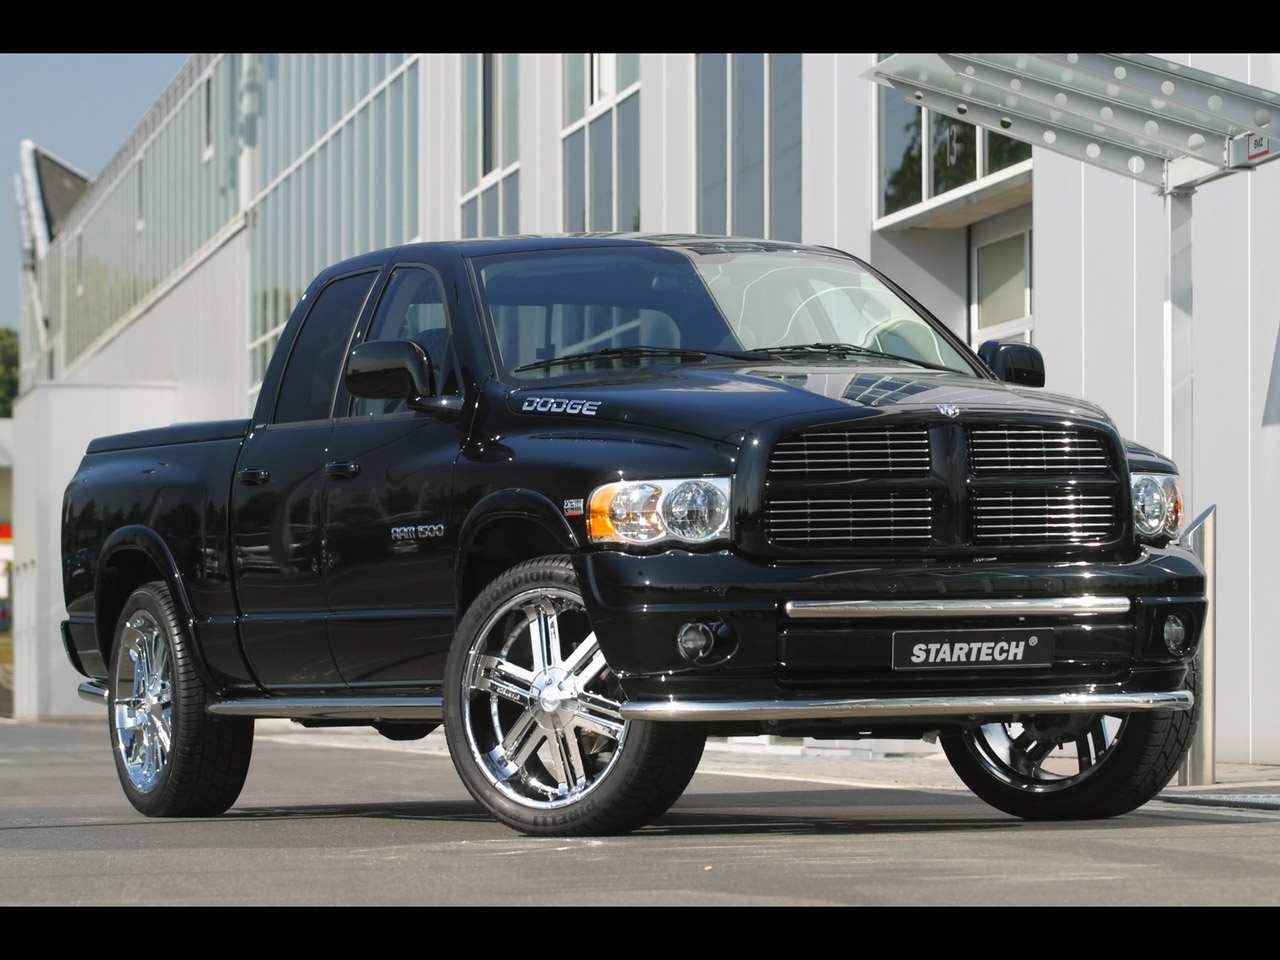 Describing used Dodge Ram trucks available low priced every day at Westbury